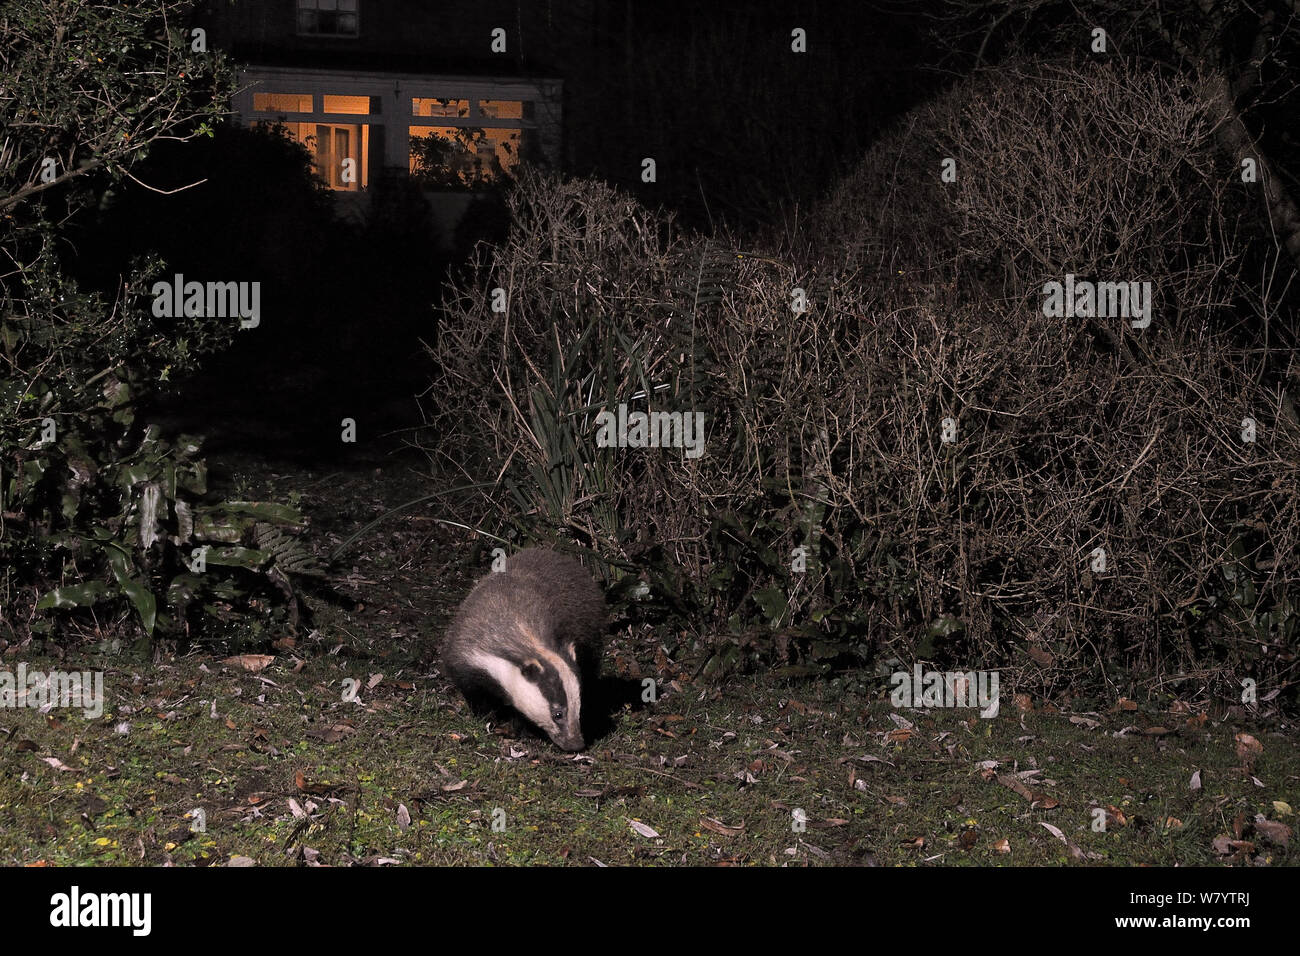 European badger (Meles meles) foraging in a garden close to a house soon after dark, Wiltshire, UK, March.  Taken by a remote camera trap. Stock Photo